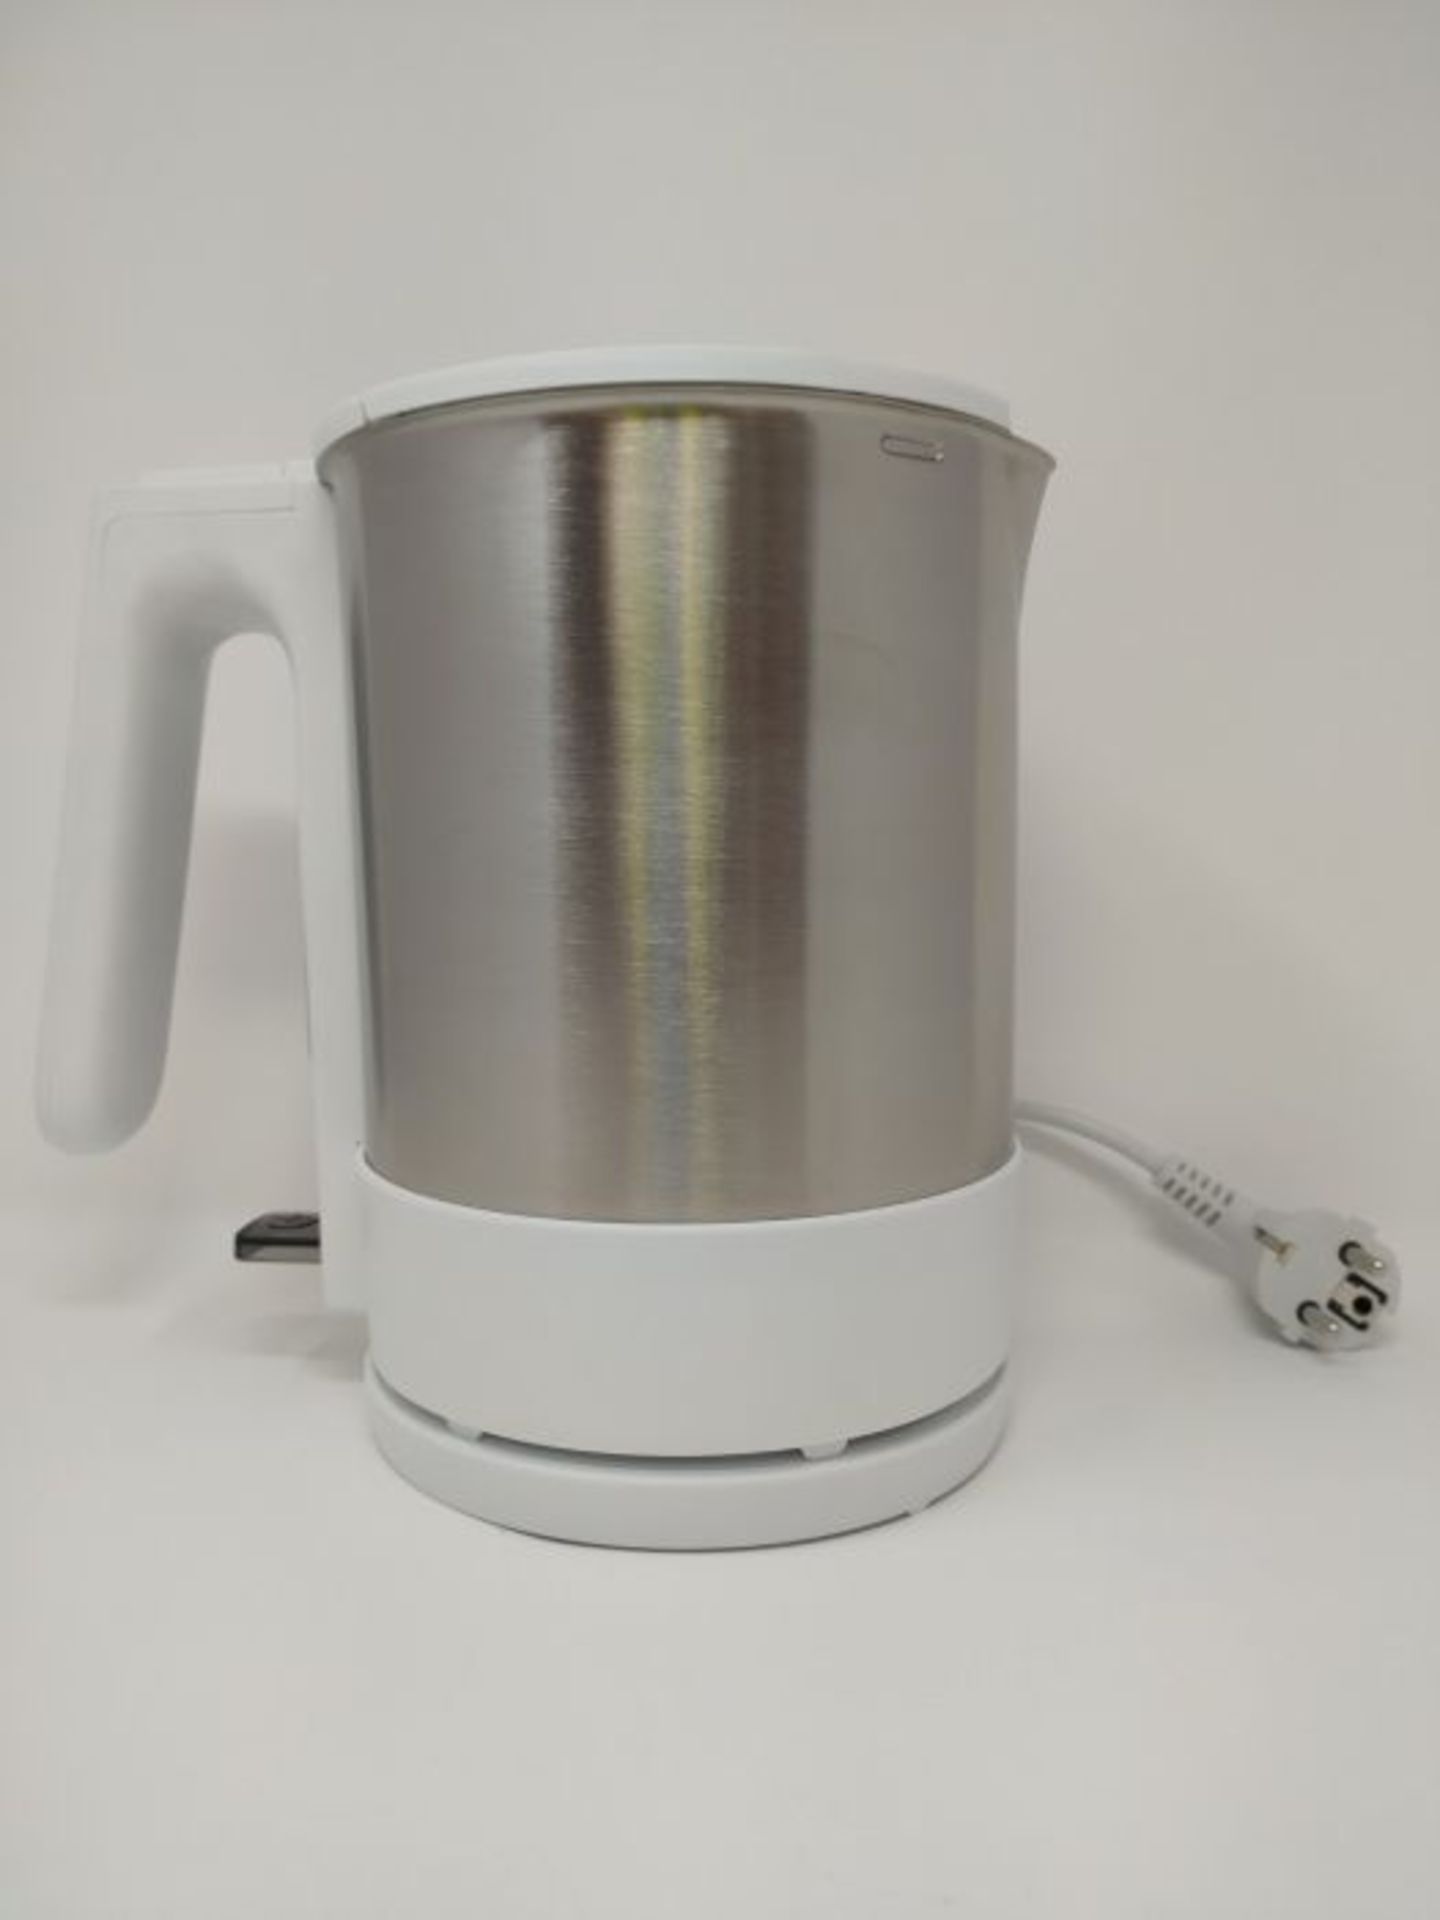 Severin WK 3419 electric kettle 1.7 L Stainless steel,White 2200 W WK 3419, 1.7 L, 220 - Image 3 of 3